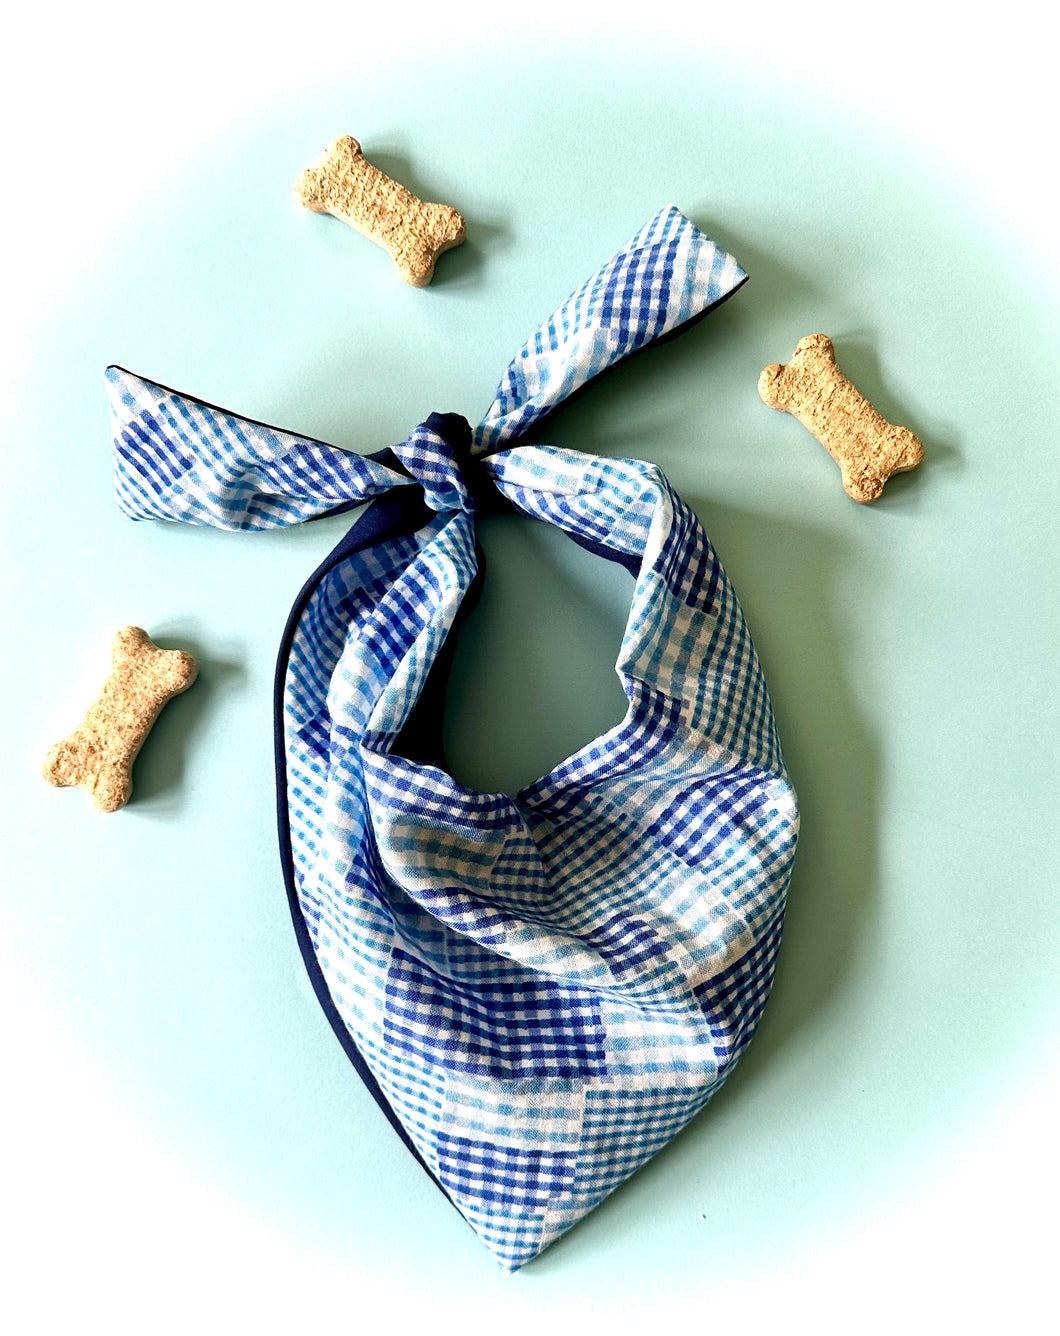 Patchwork Blue Plaid Dog Bandana Handmade Gingham Pet Scarf for Stylish Pups Unique Checkered Neckwear Perfect Gift for Dog Lovers Idea